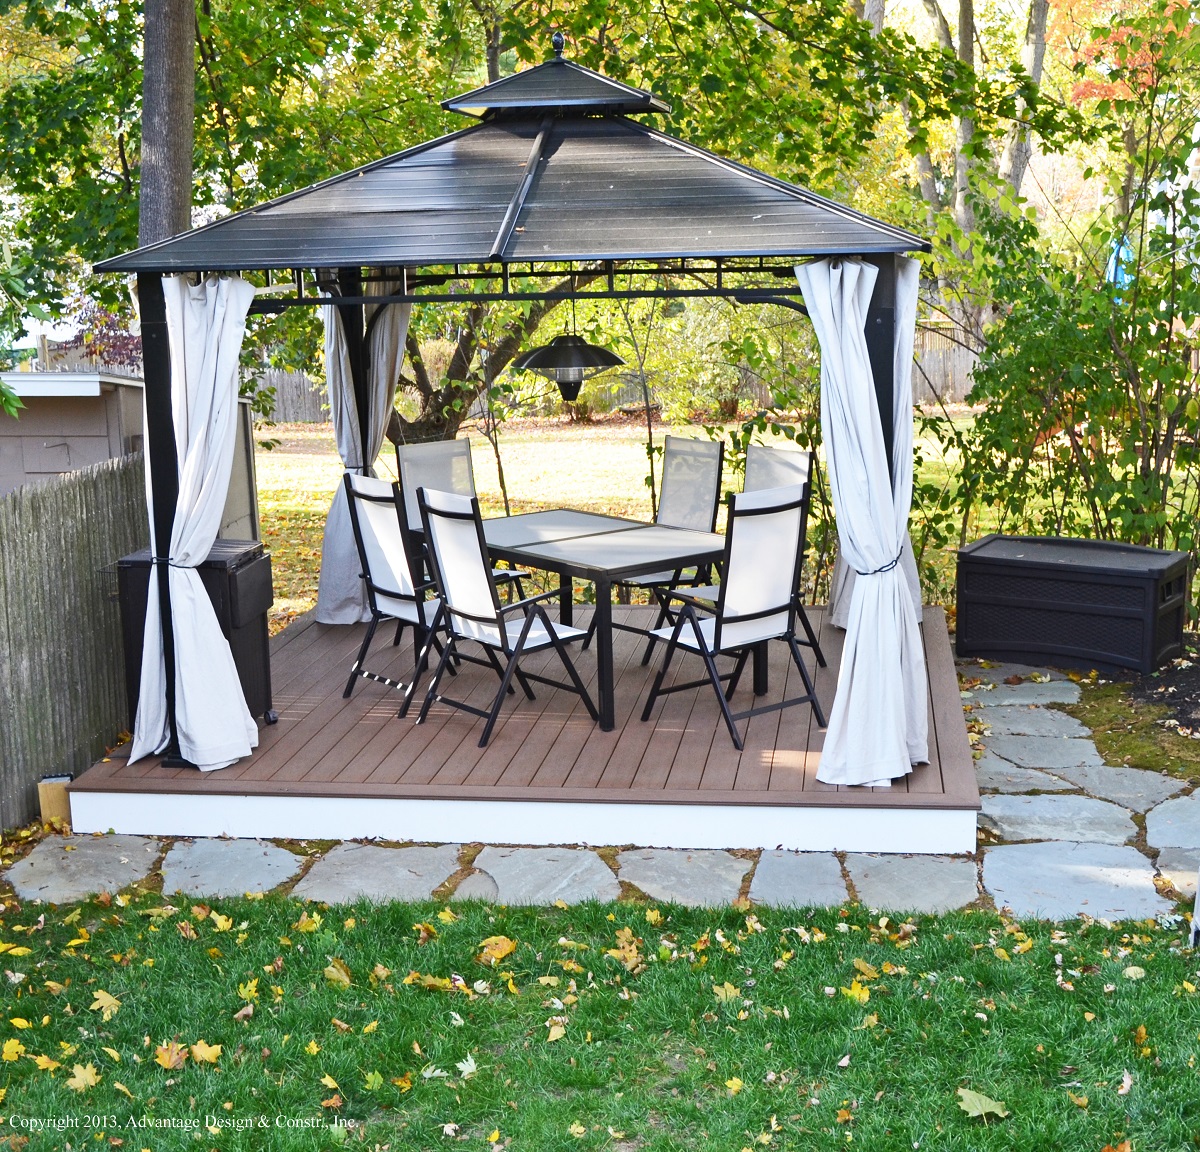 Don’t Wait Too Long – Move Ahead With Outdoor Living Plans.